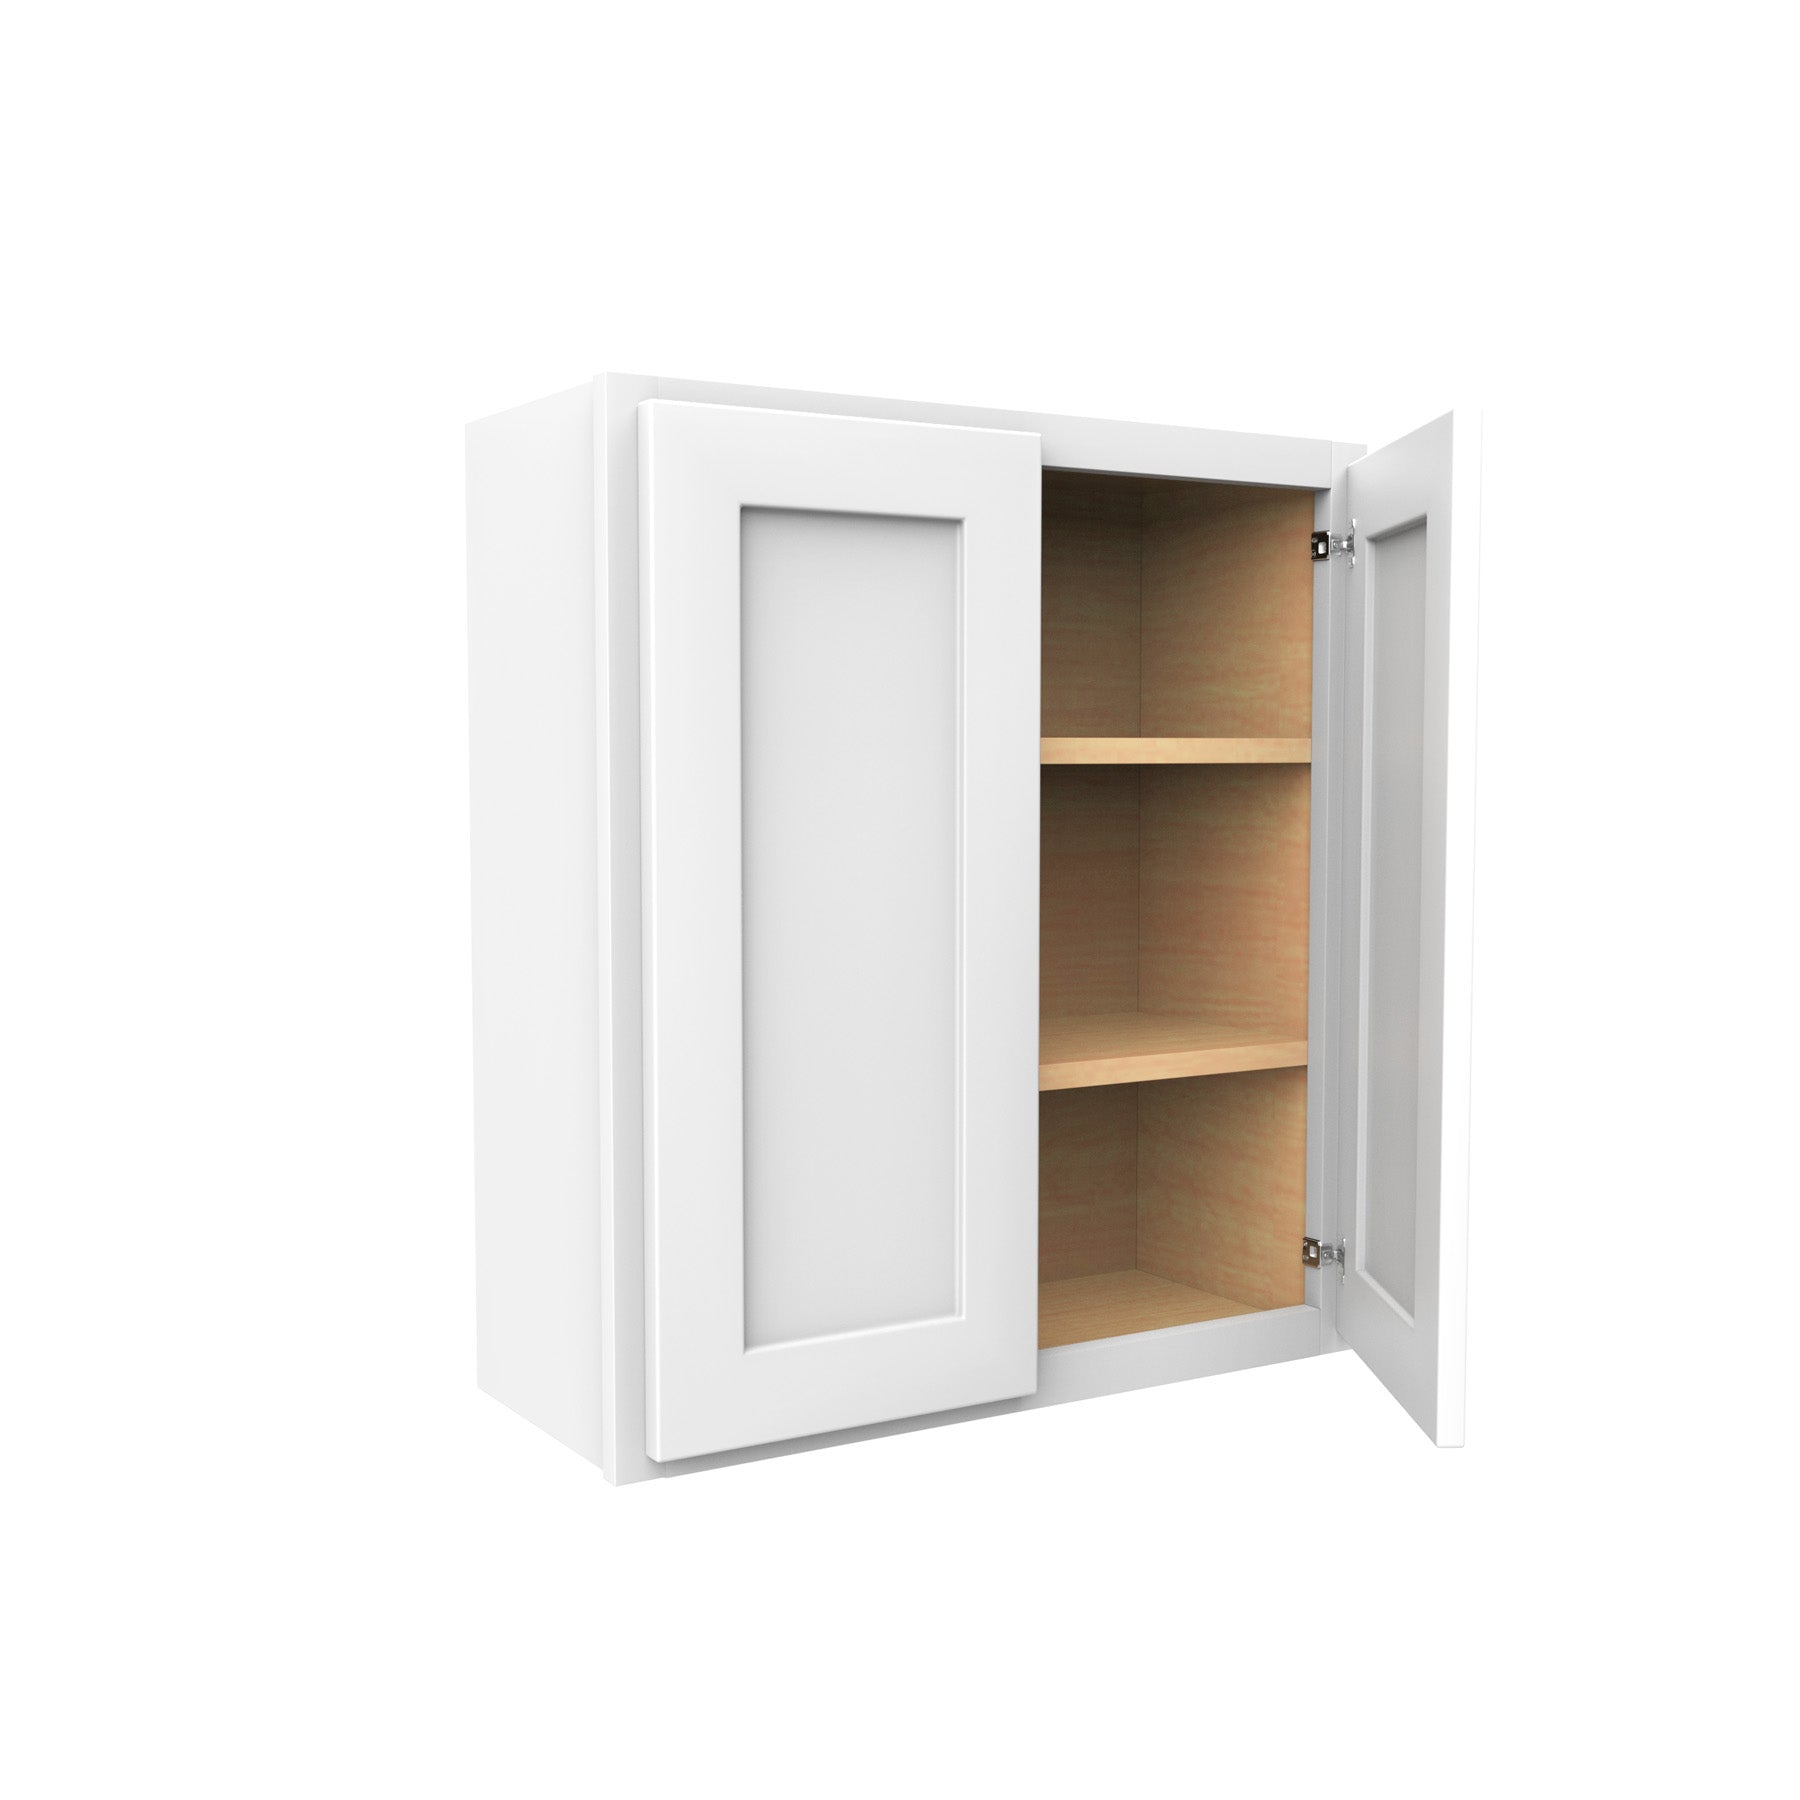 30 Inch High Double Door Wall Cabinet - Luxor White Shaker - Ready To Assemble, 27"W x 30"H x 12"D